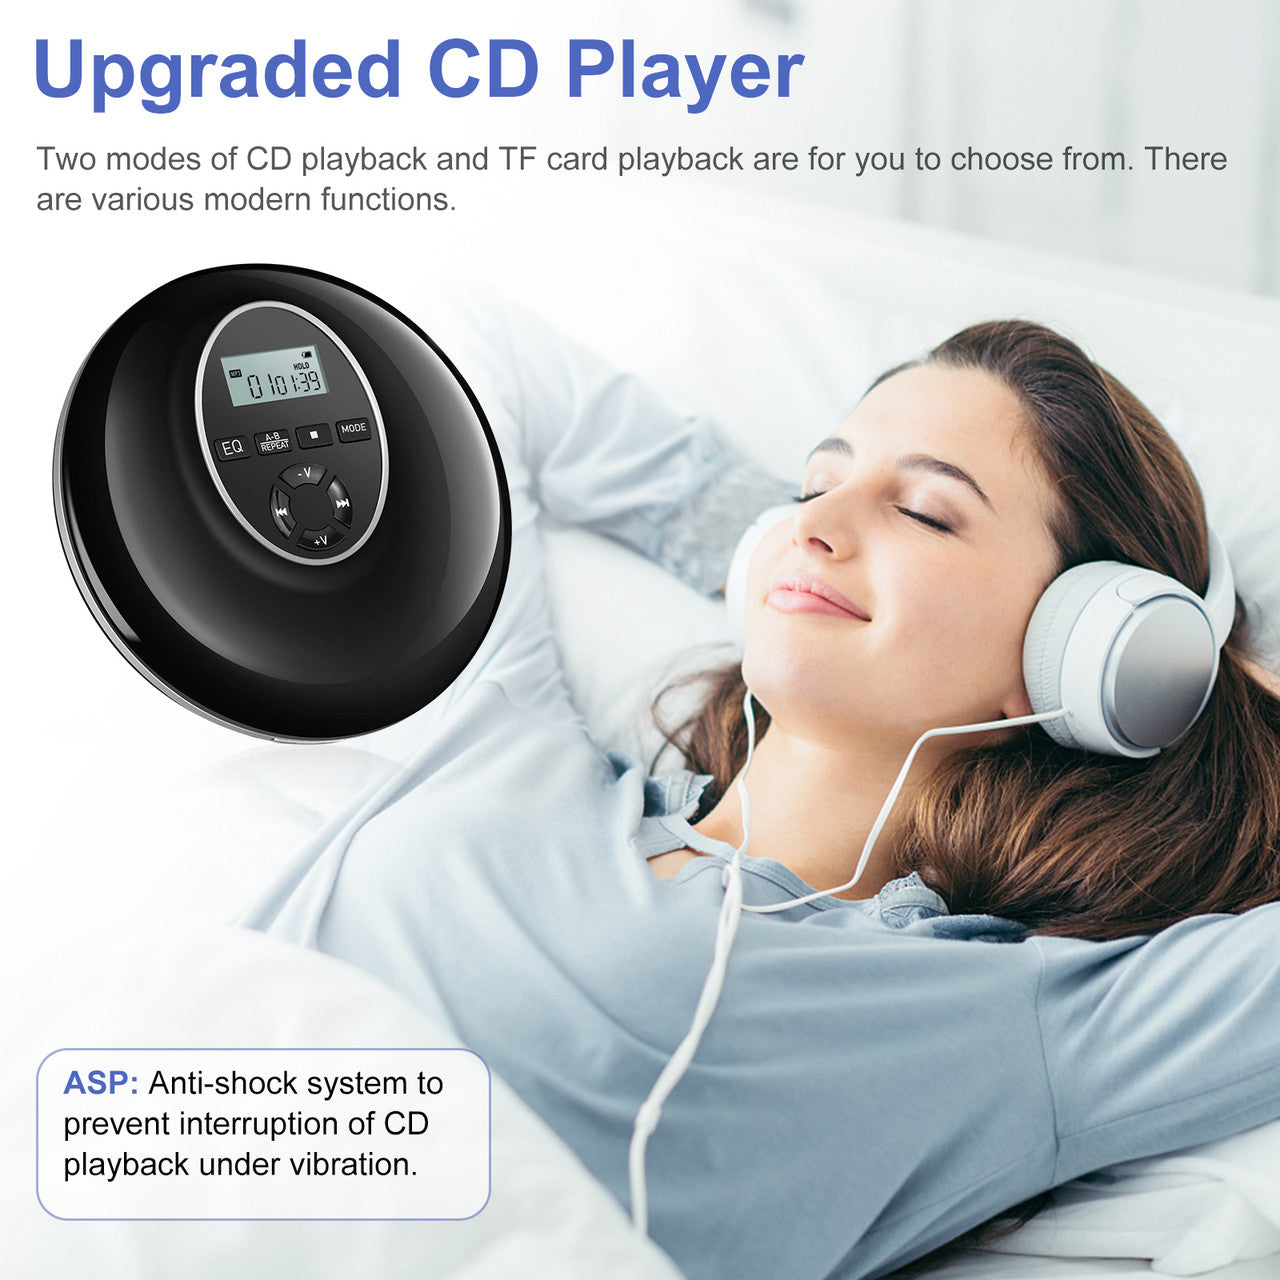 Rechargeable Portable CD Player - For Car and Travel, Walkman CD Player with Headphone and Anti-skip/Shockproof, Personal CD Player with LCD Display, Aux Cable, Backlight (Black)